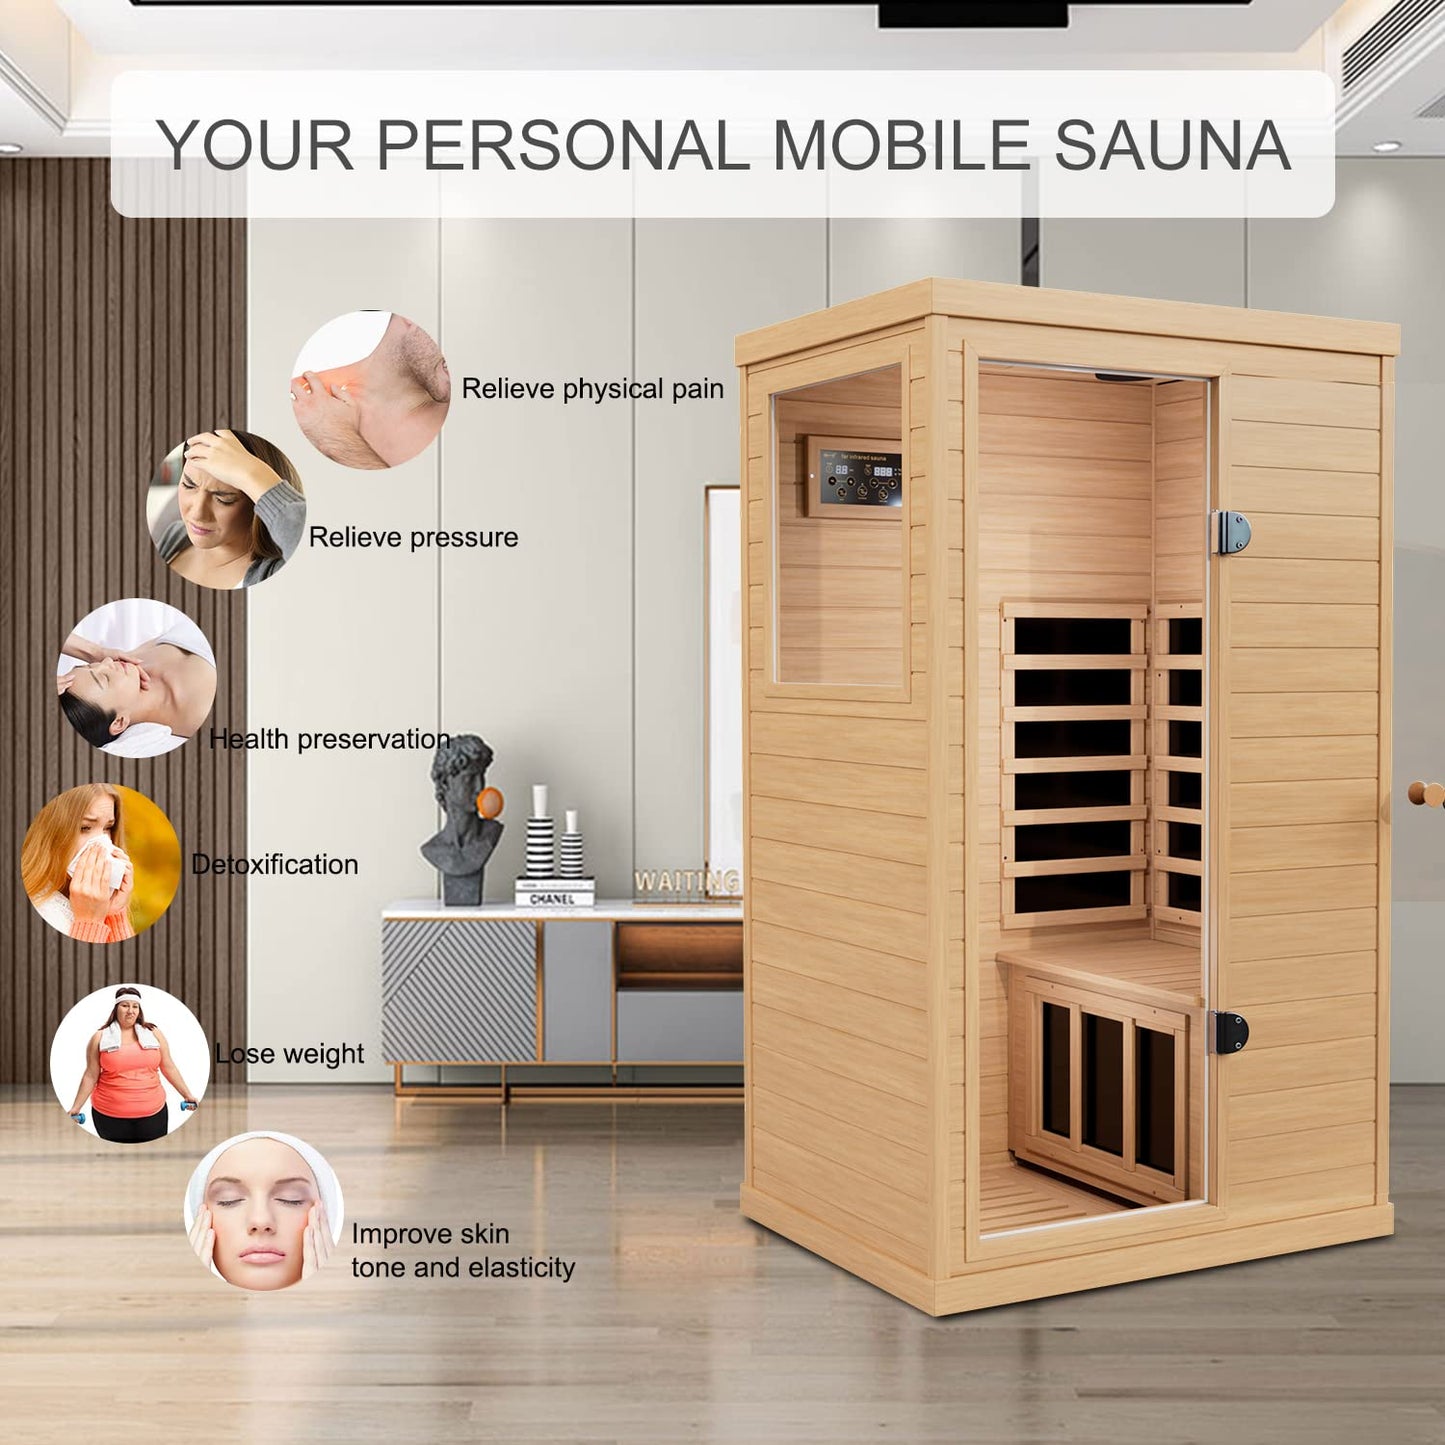 LTCCDSS Infrared Sauna, 1 Person Far Infrared Sauna for Home, with 1050W Indoor Sauna, Low EMF Heaters, 2 Bluetooth Speakers, 1 LED Reading Lamp